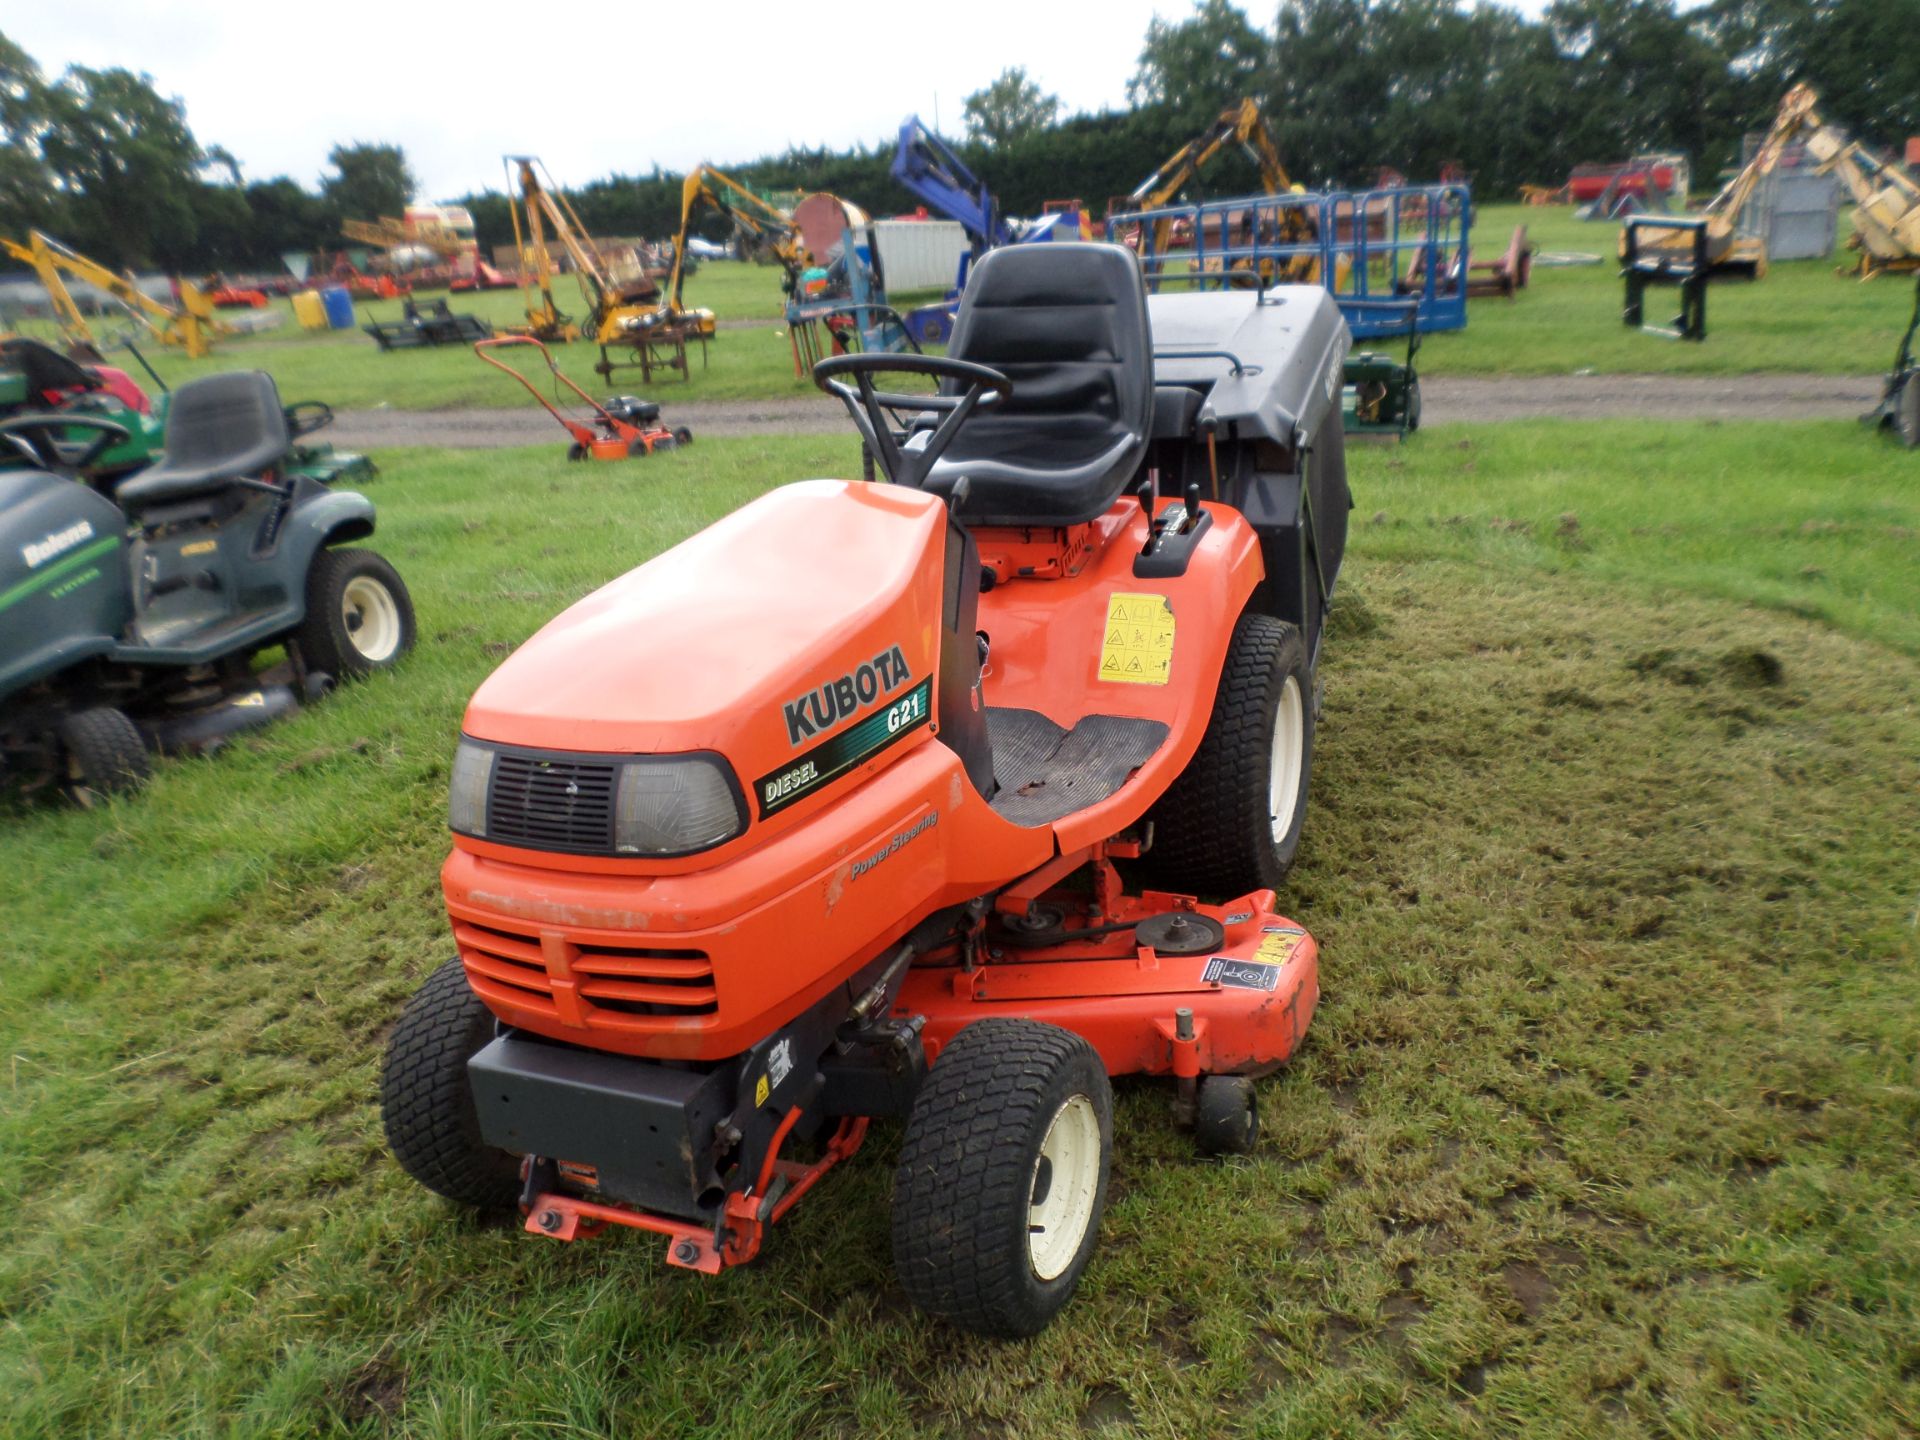 Kubota G21 diesel ride on mower 48" direct collect,hydraulic deck lift & grass collector